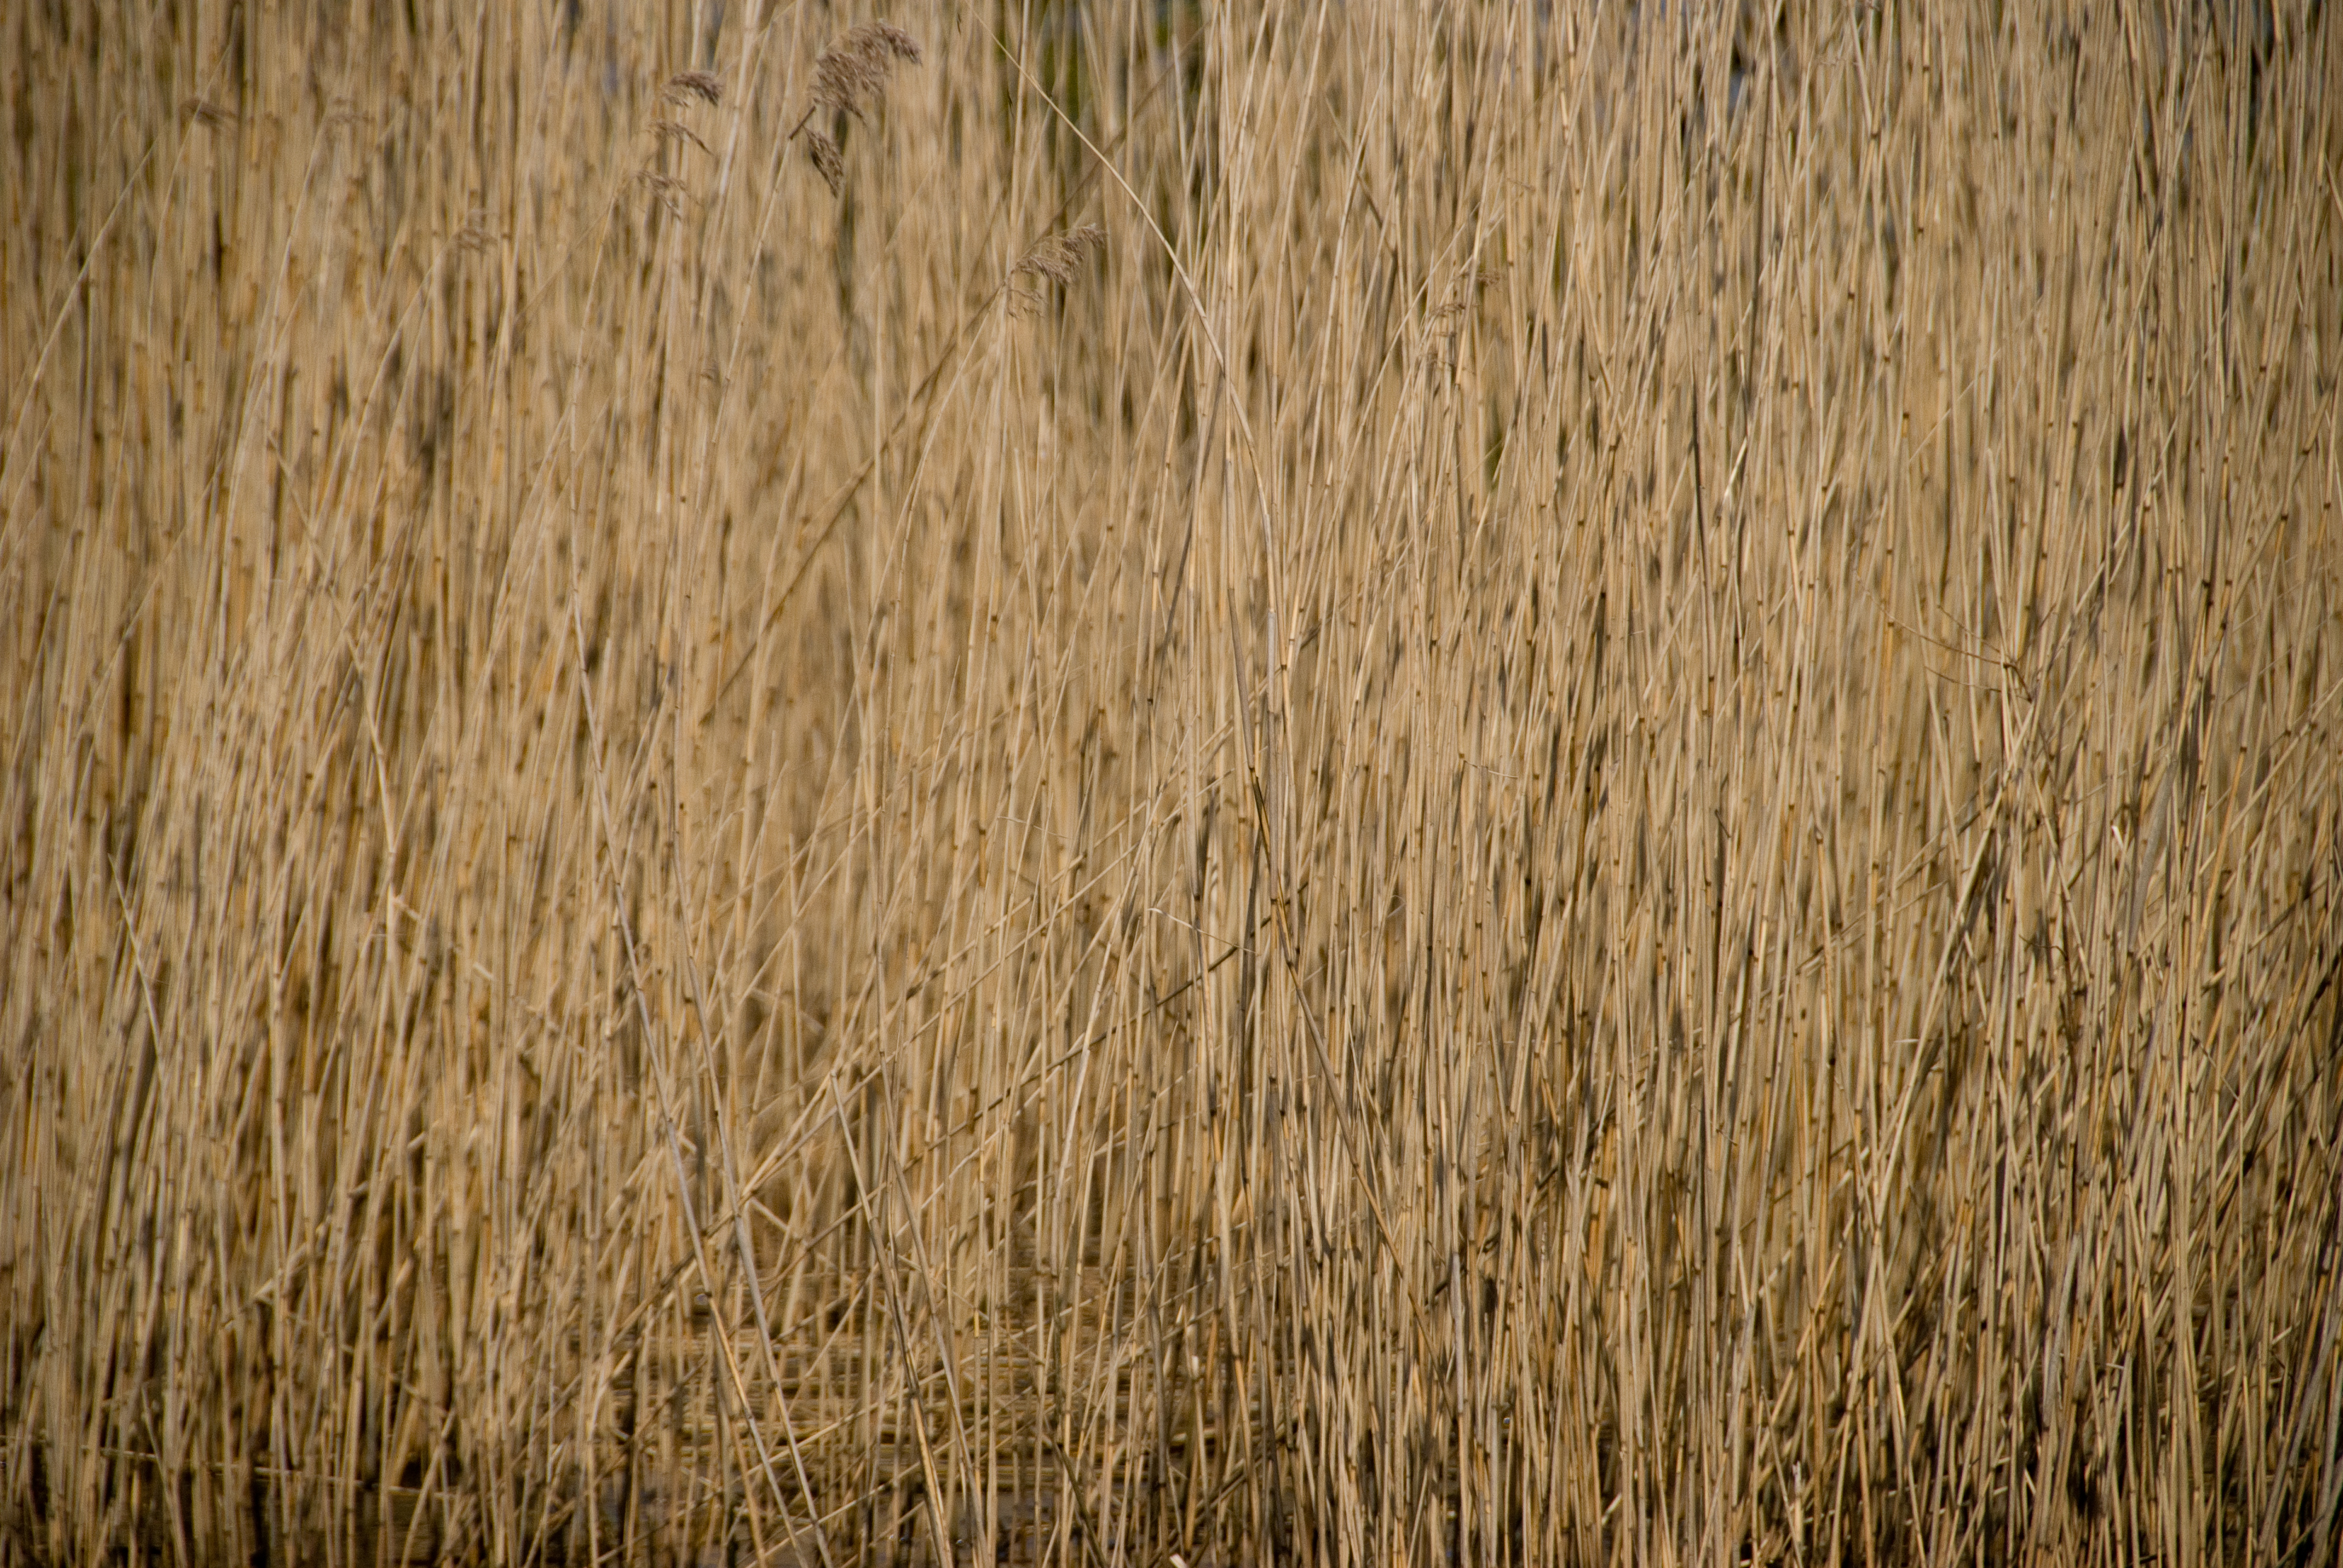 Water Reed - Pattern Pictures free textures and free photos